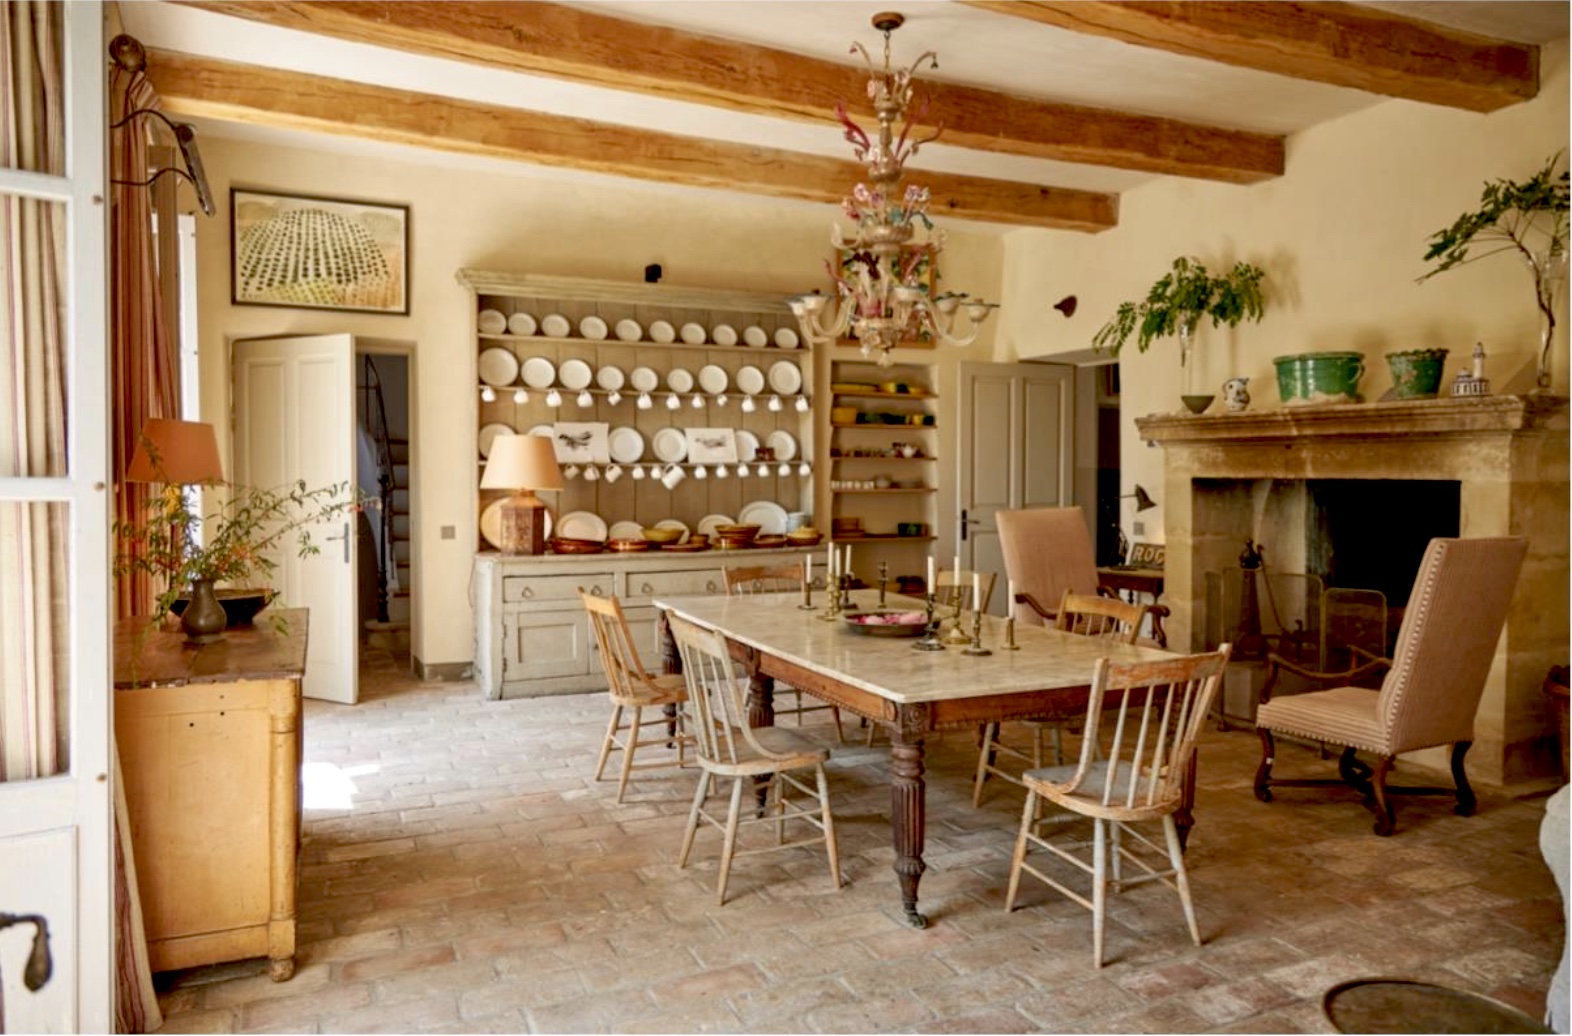 The kitchen at Robert Kime's home in Provence, 'La Gonette'